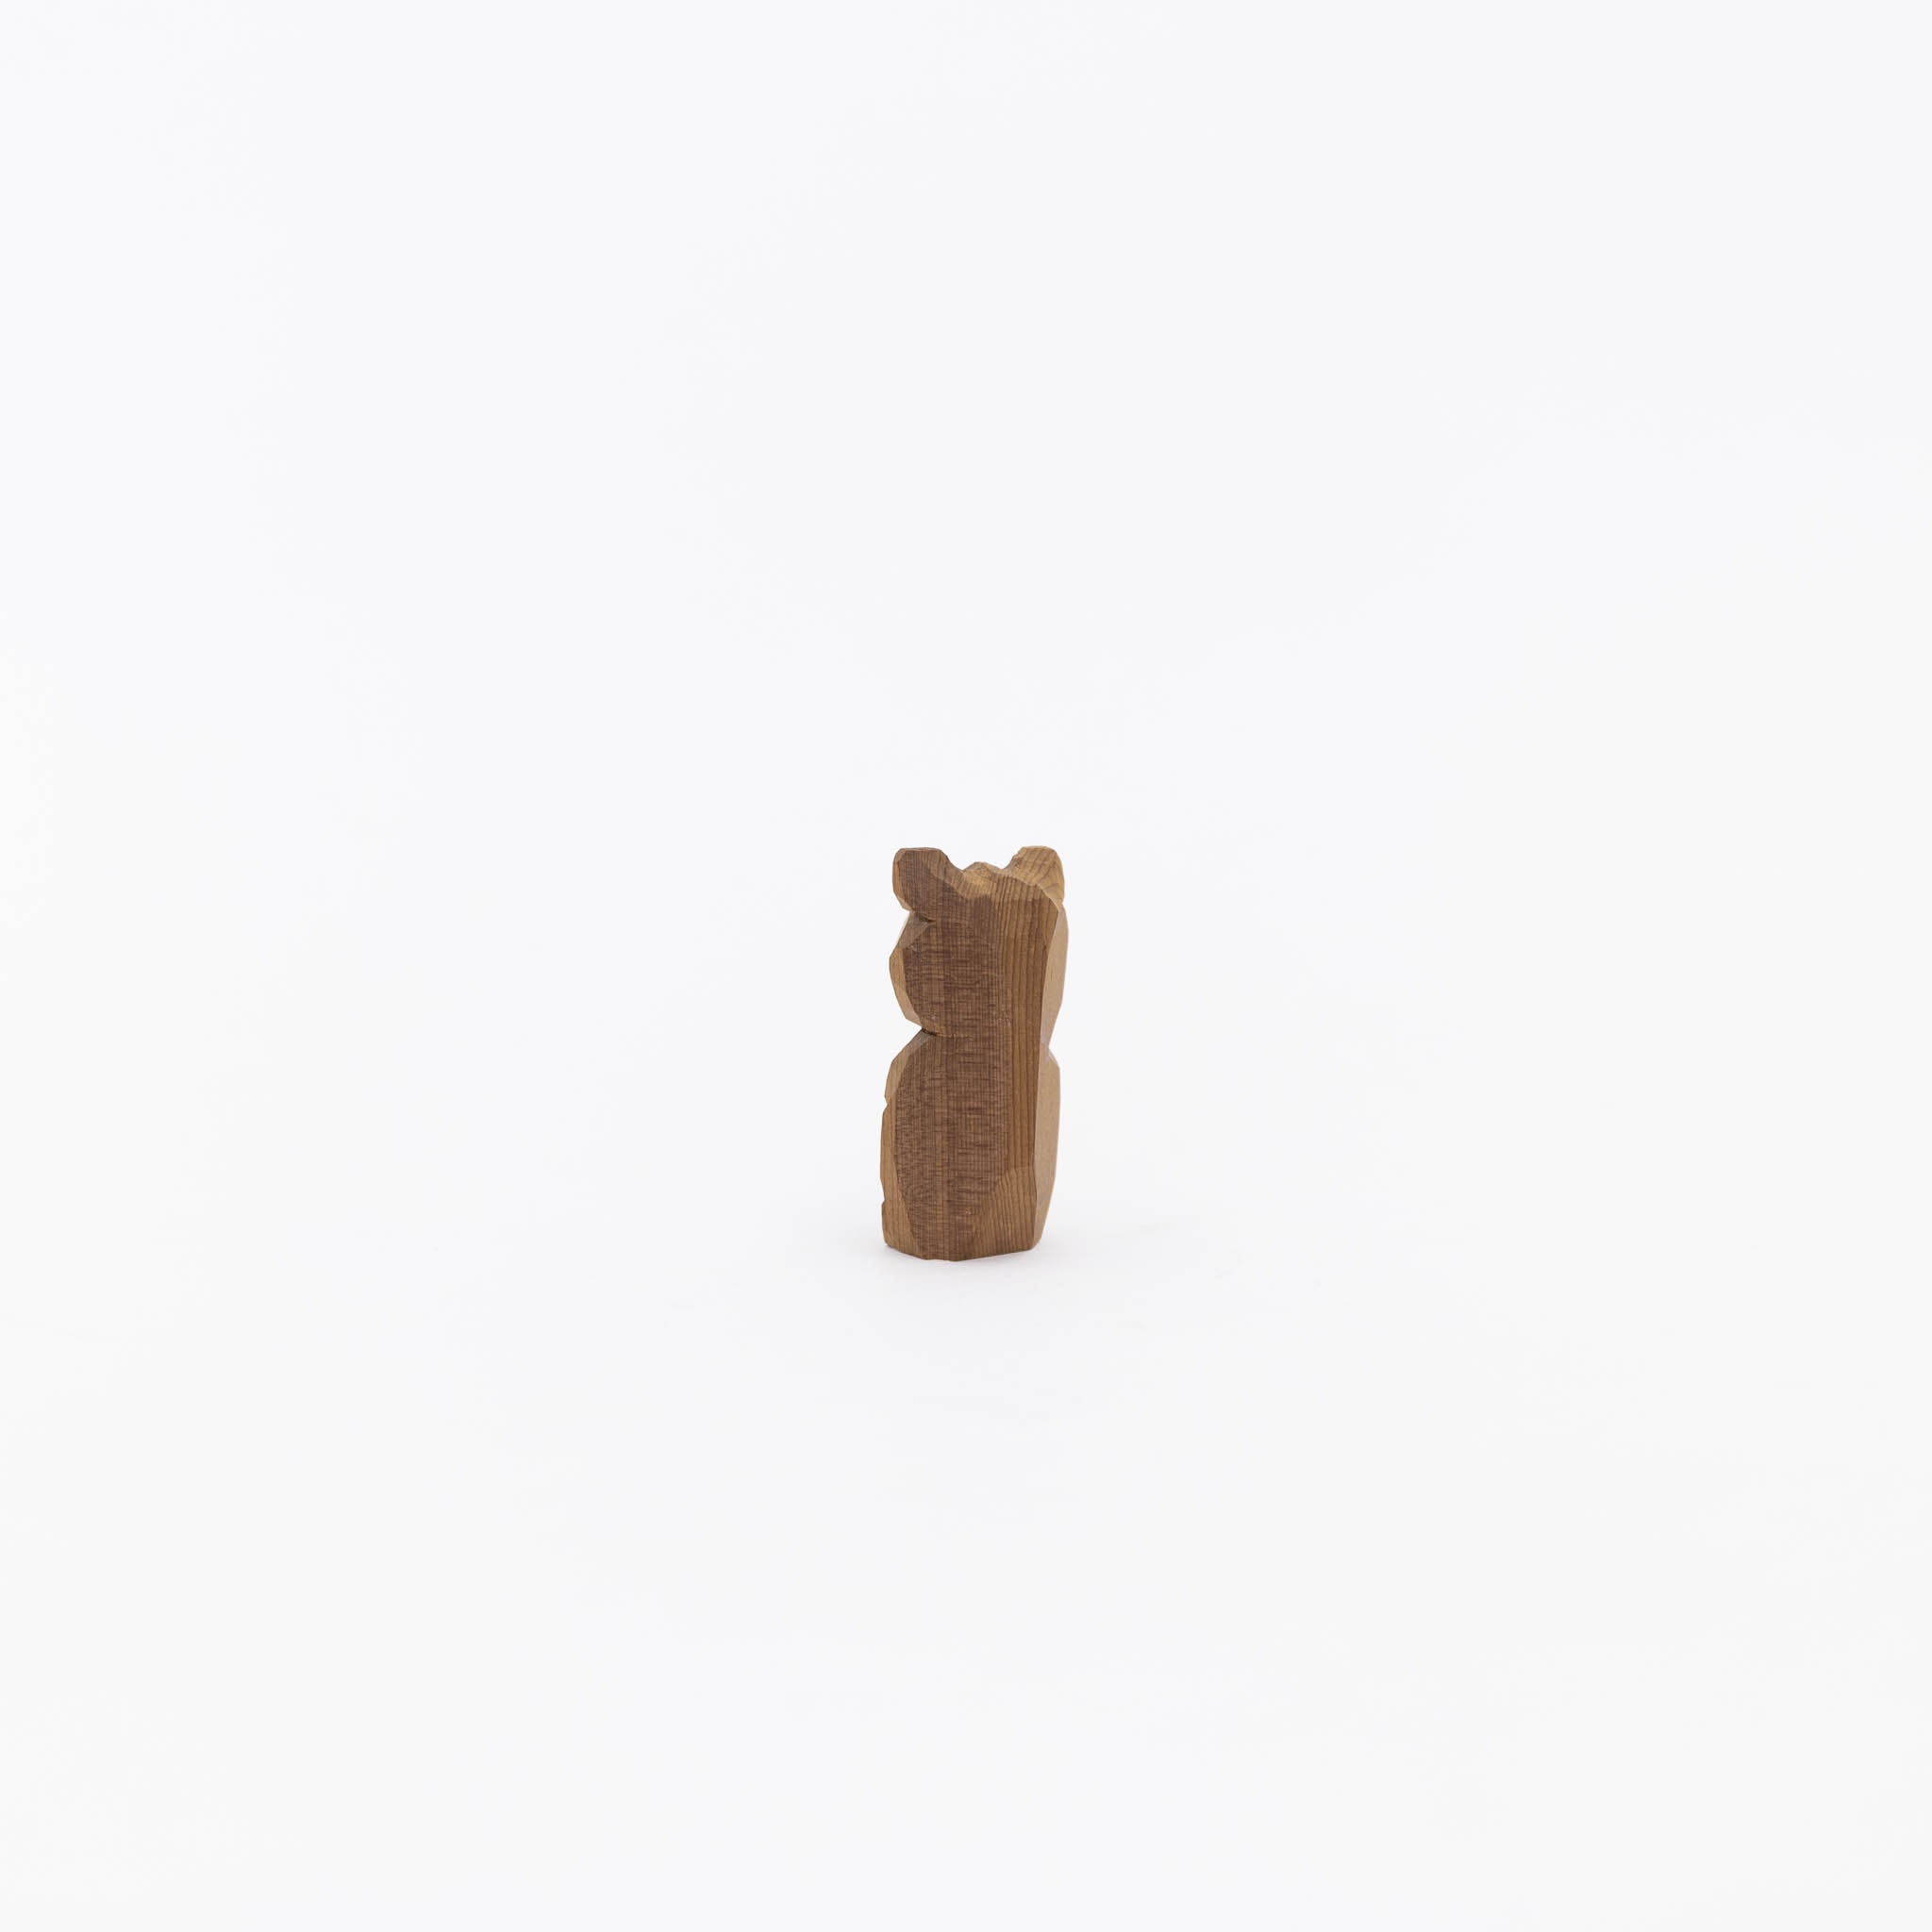 094 Wooden Bear Object from the Ainu | Tortoise General Store